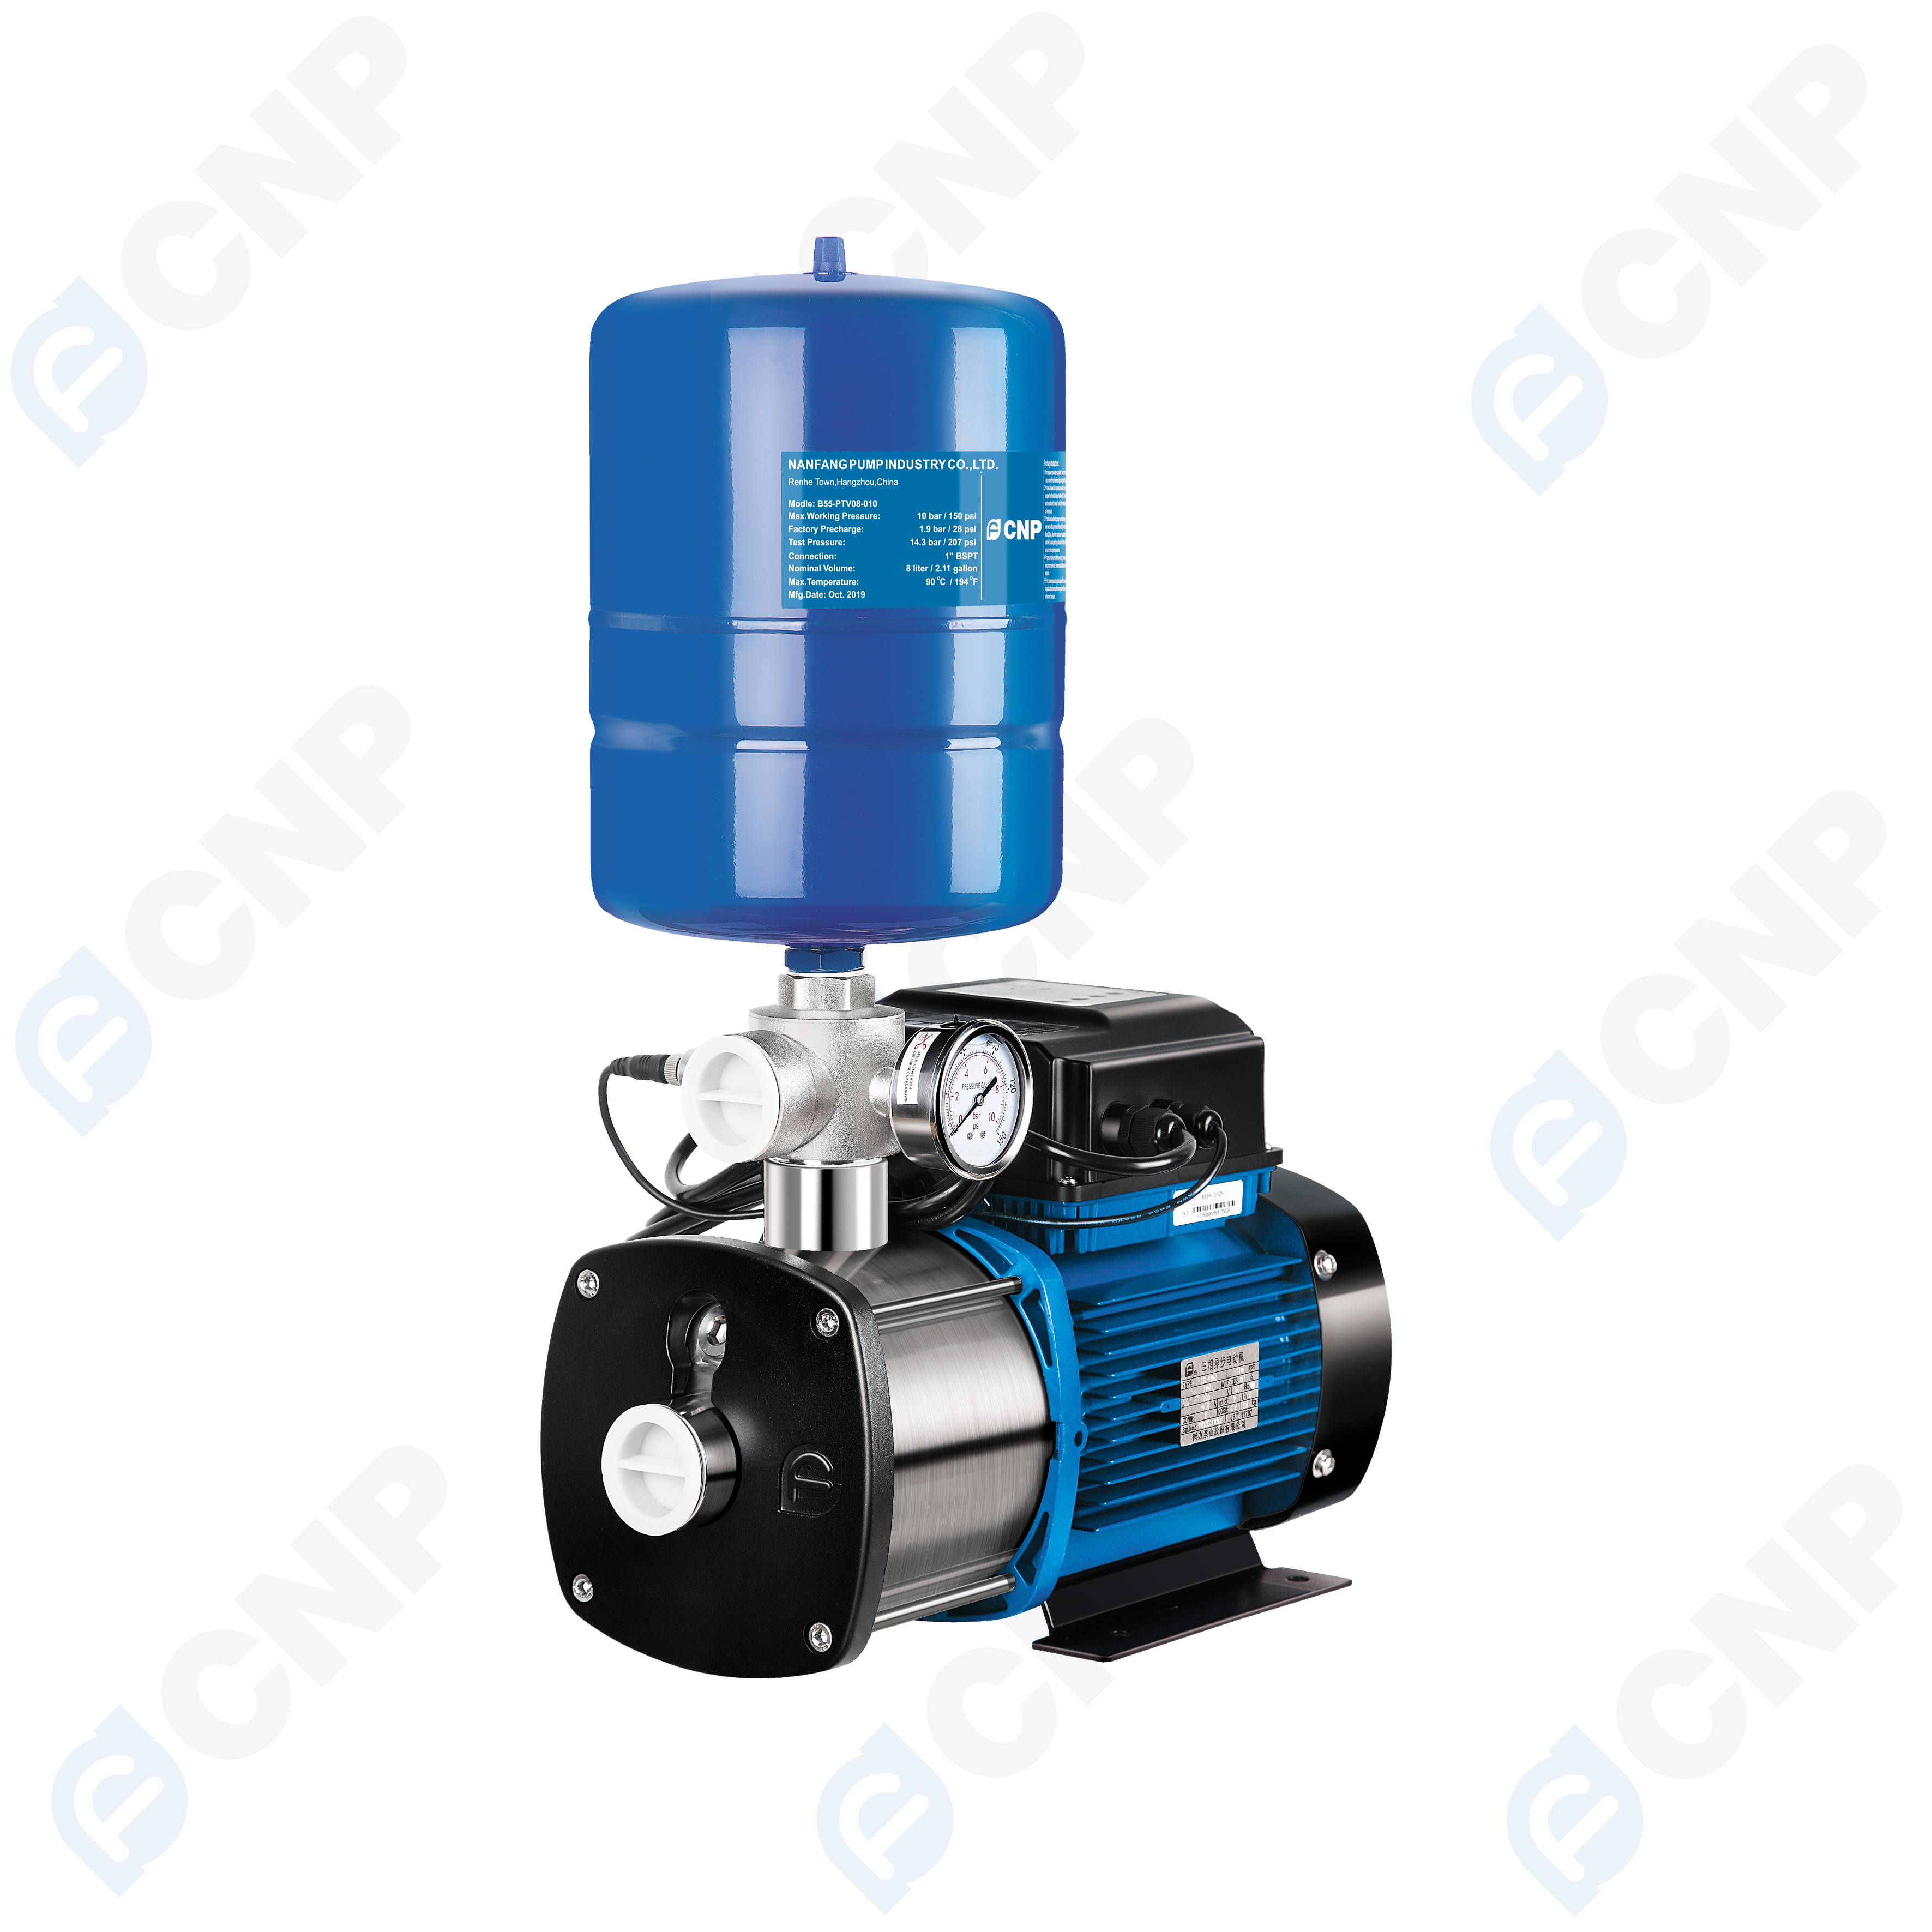 CHME Horizontal Intelligent Constant Pressure Variable Frequency Pump